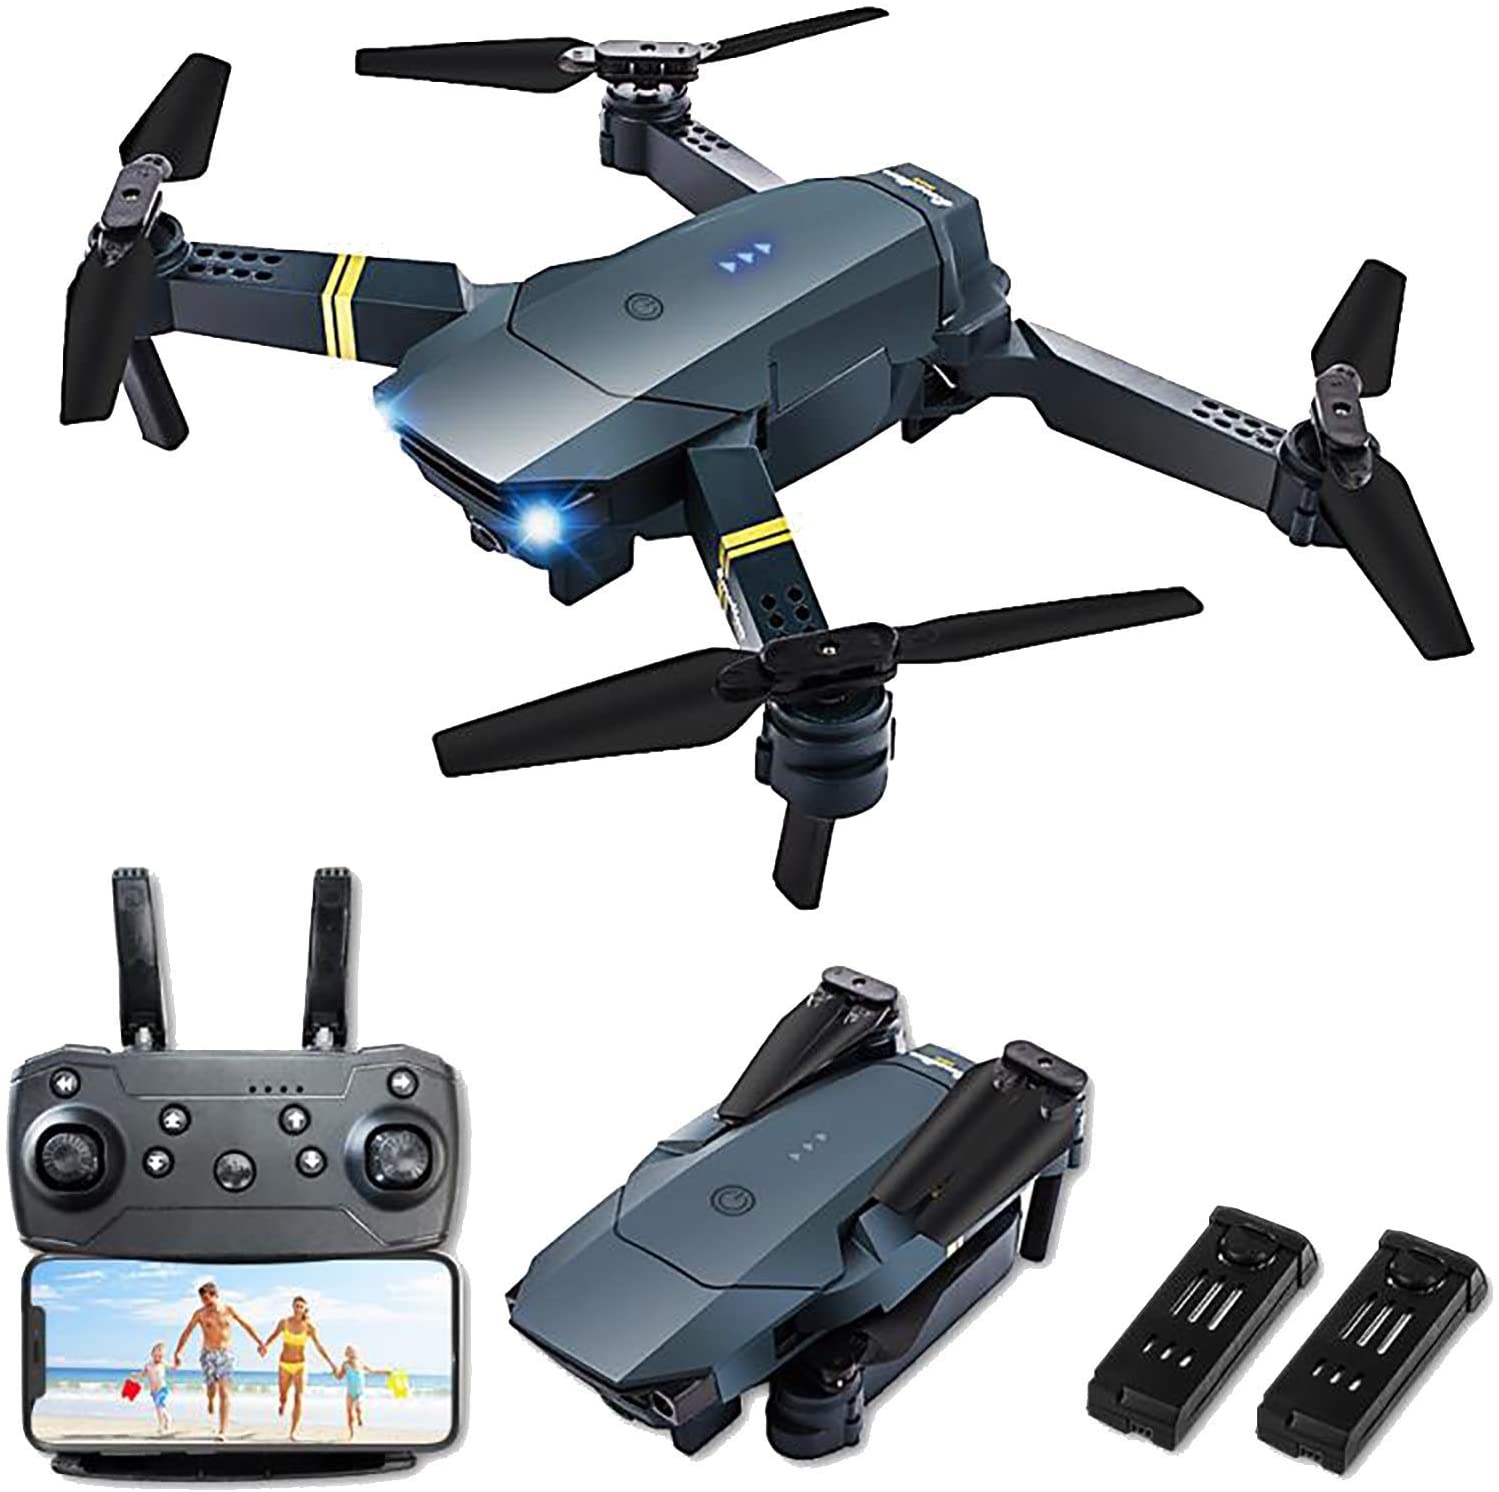 Drones with Camera for Adults, Fcoreey E58 Foldable RC Quadcopter Drone with 1080P HD Camera for Beginners，WiFi FPV Live Video, Altitude Hold, Headless Mode, One Key Take Off/Landing